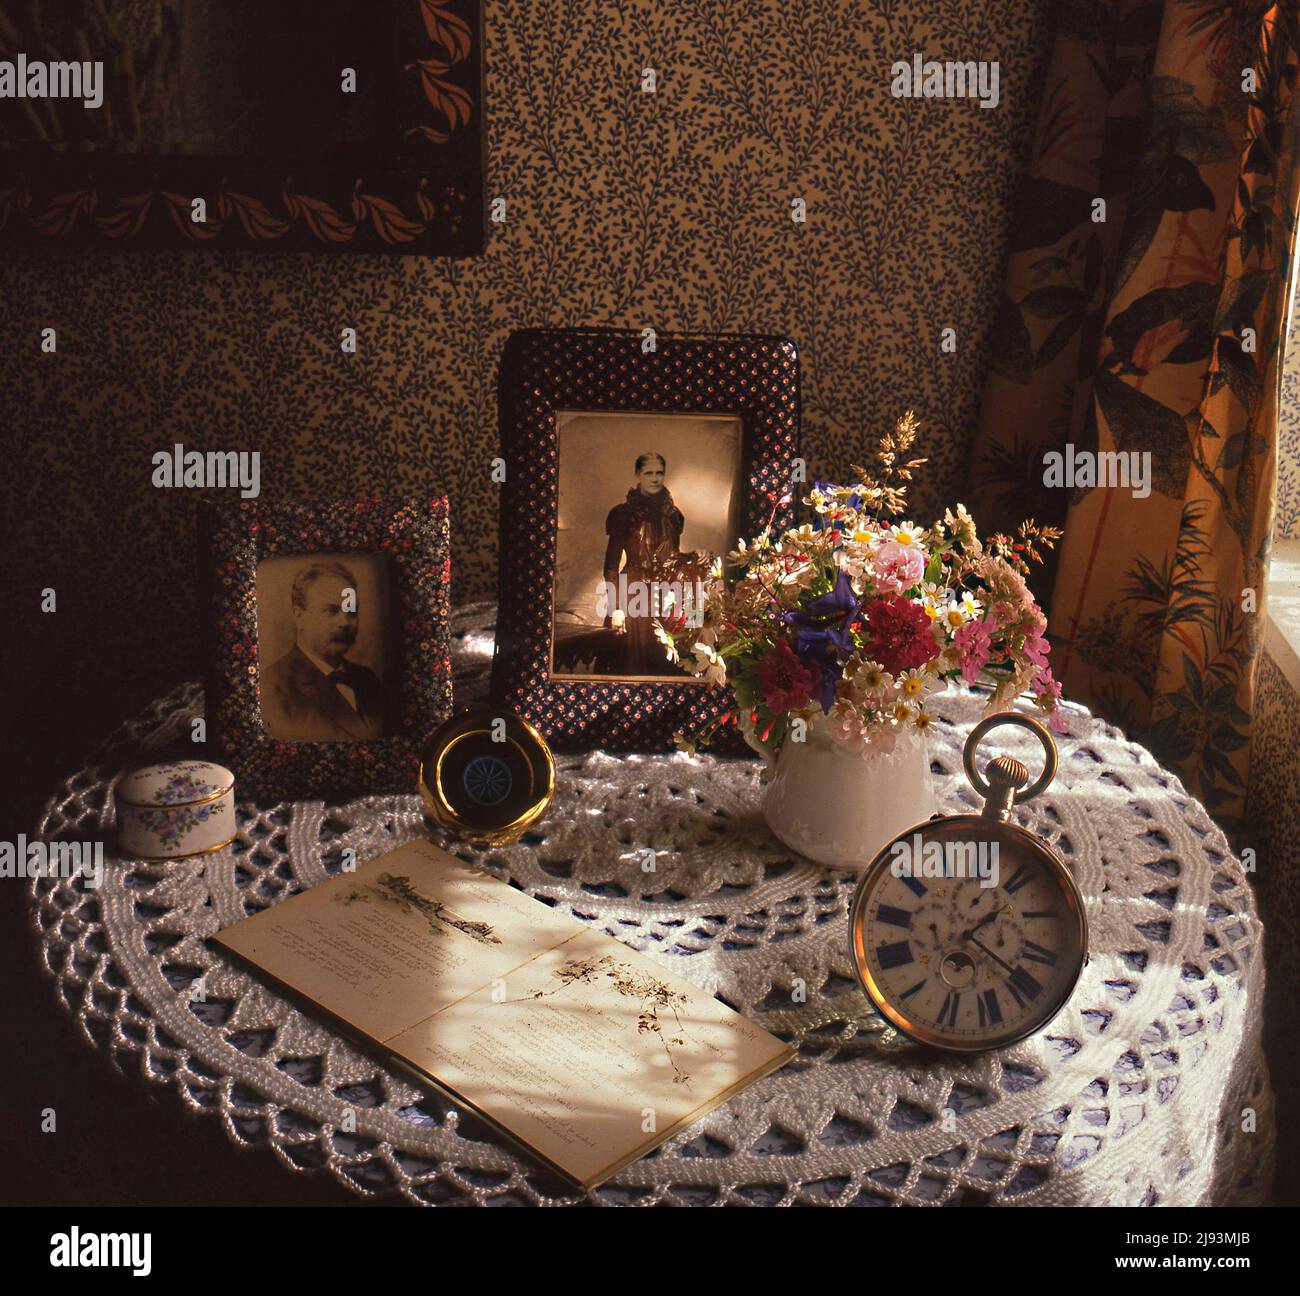 Period still life table setting with picture frames and an old clock, illuminated by window lighting. Stock Photo